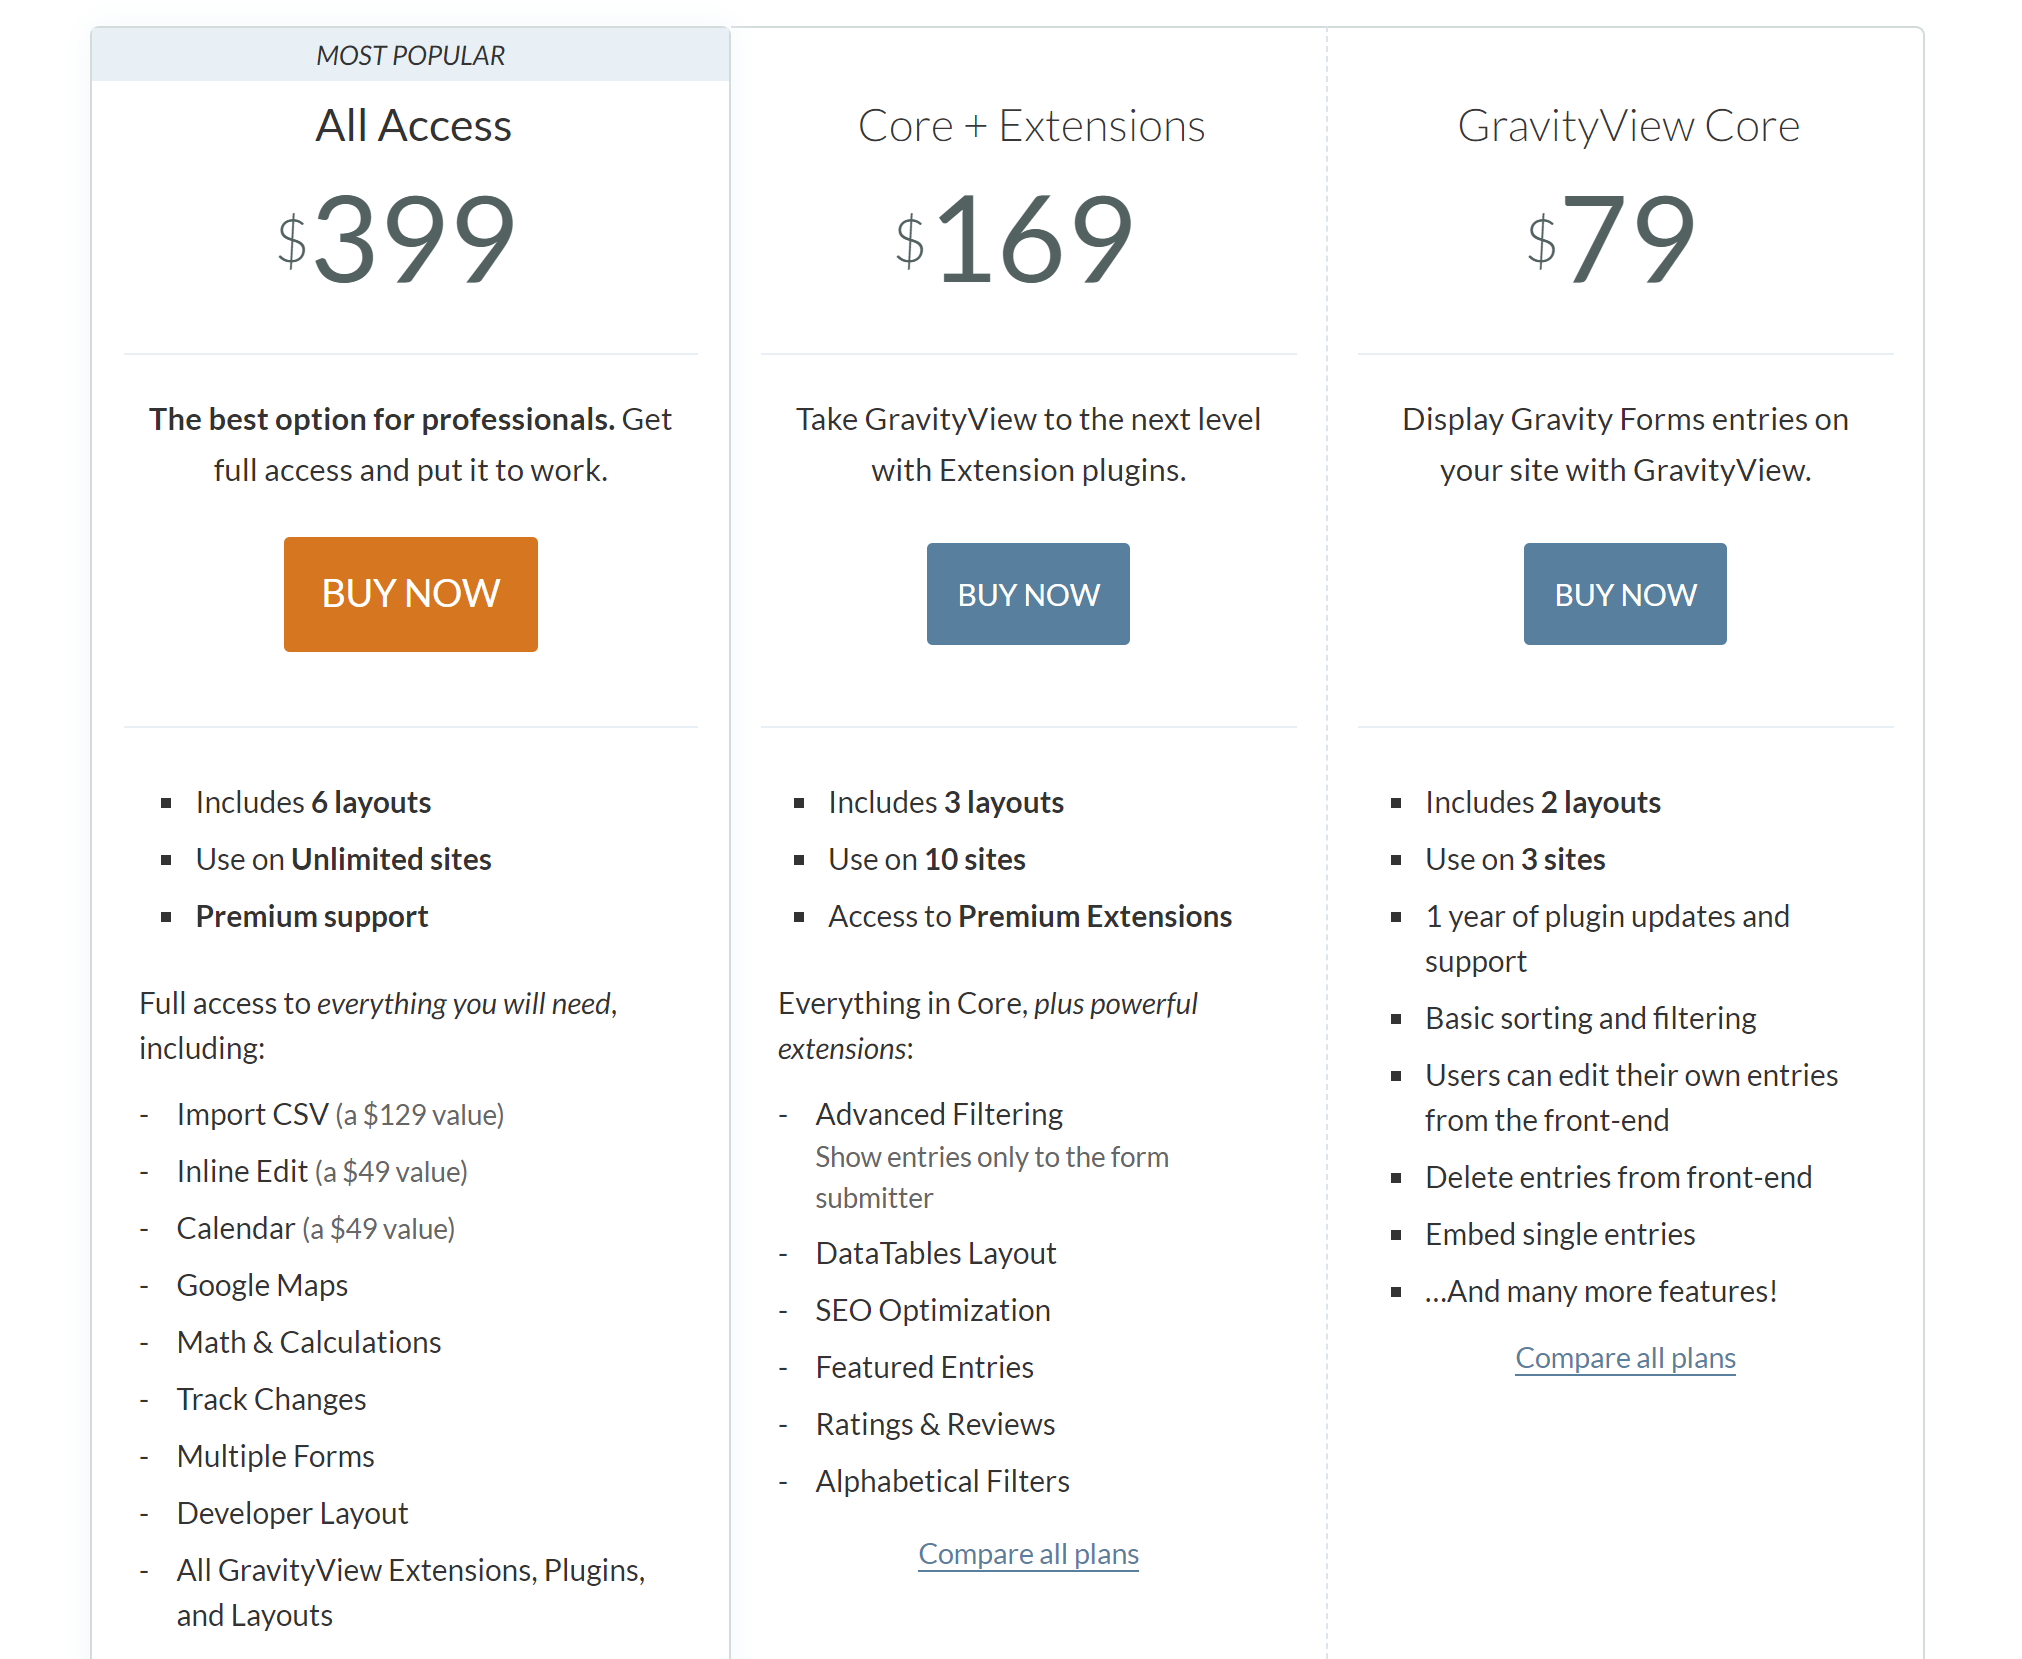 The pricing page for GravityView